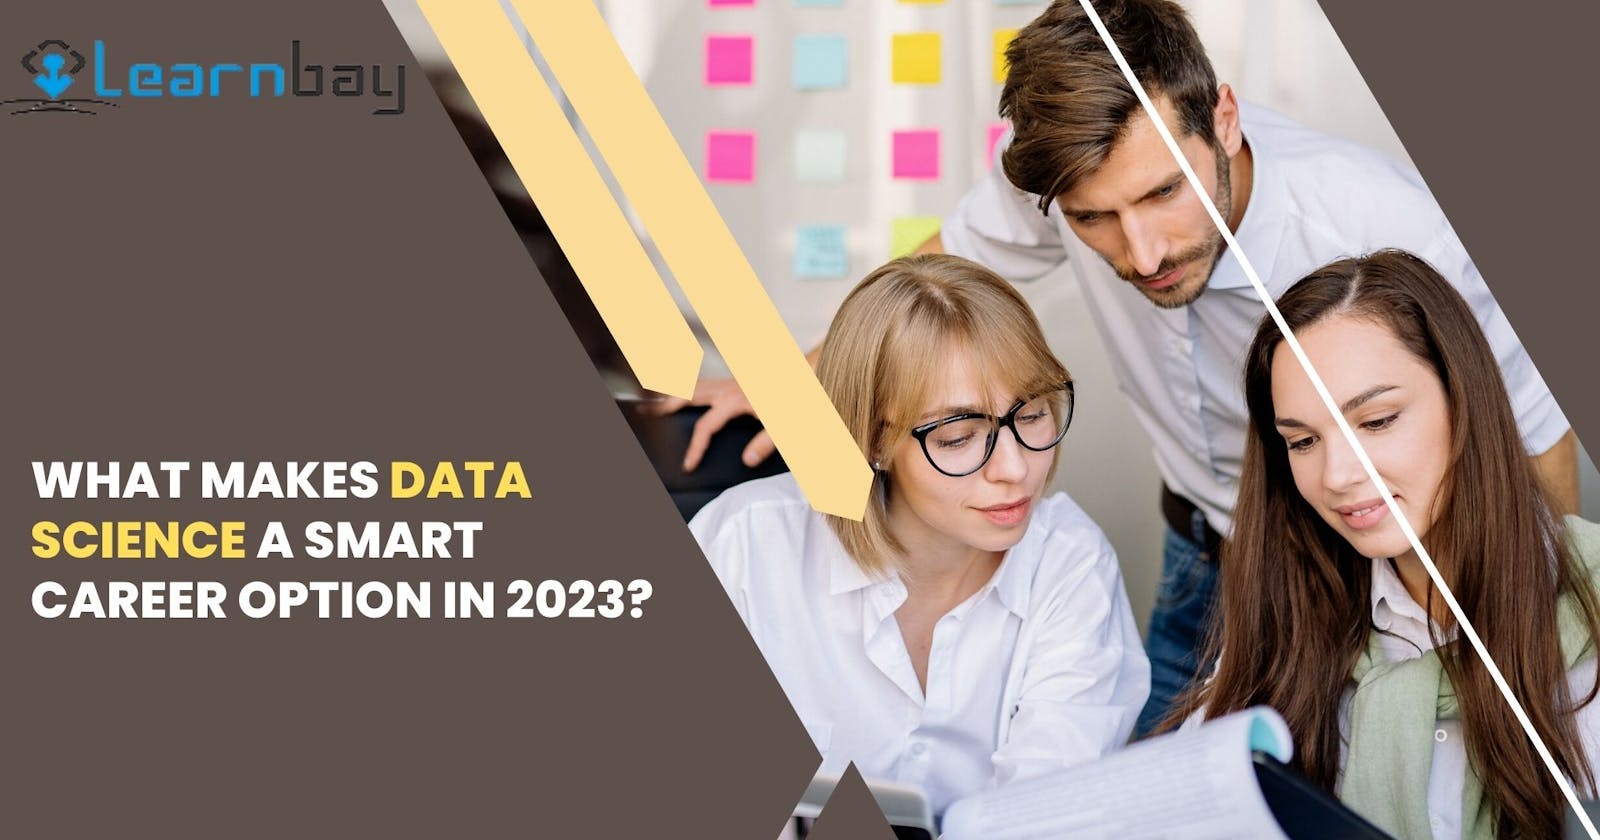 What Makes Data Science A Smart Career Option in 2023?